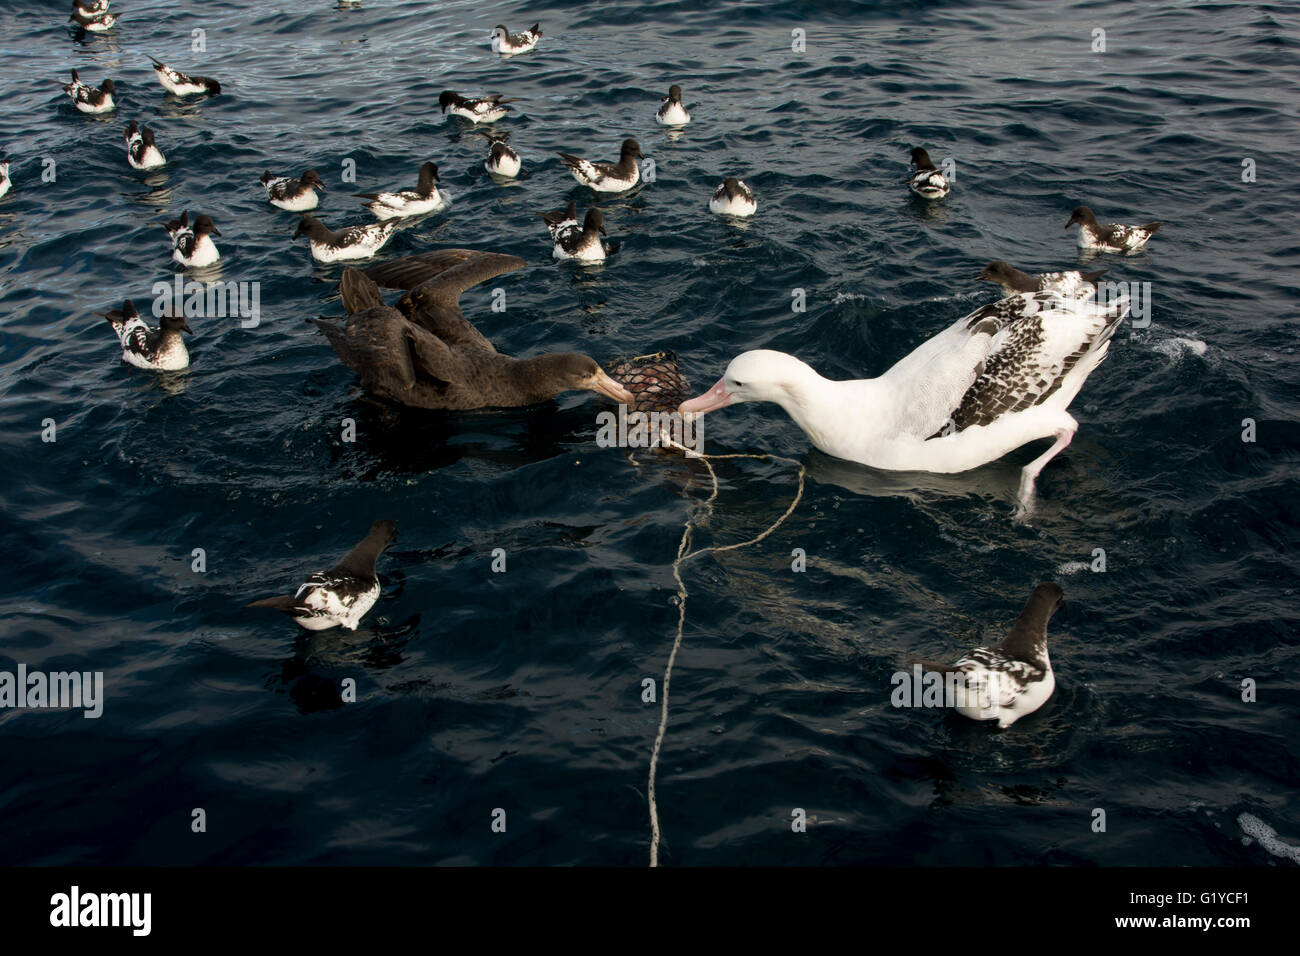 Albatross Encounter attract off the New Zealand coast albatrosses and other seabirds with baits filled with fish liver. Stock Photo